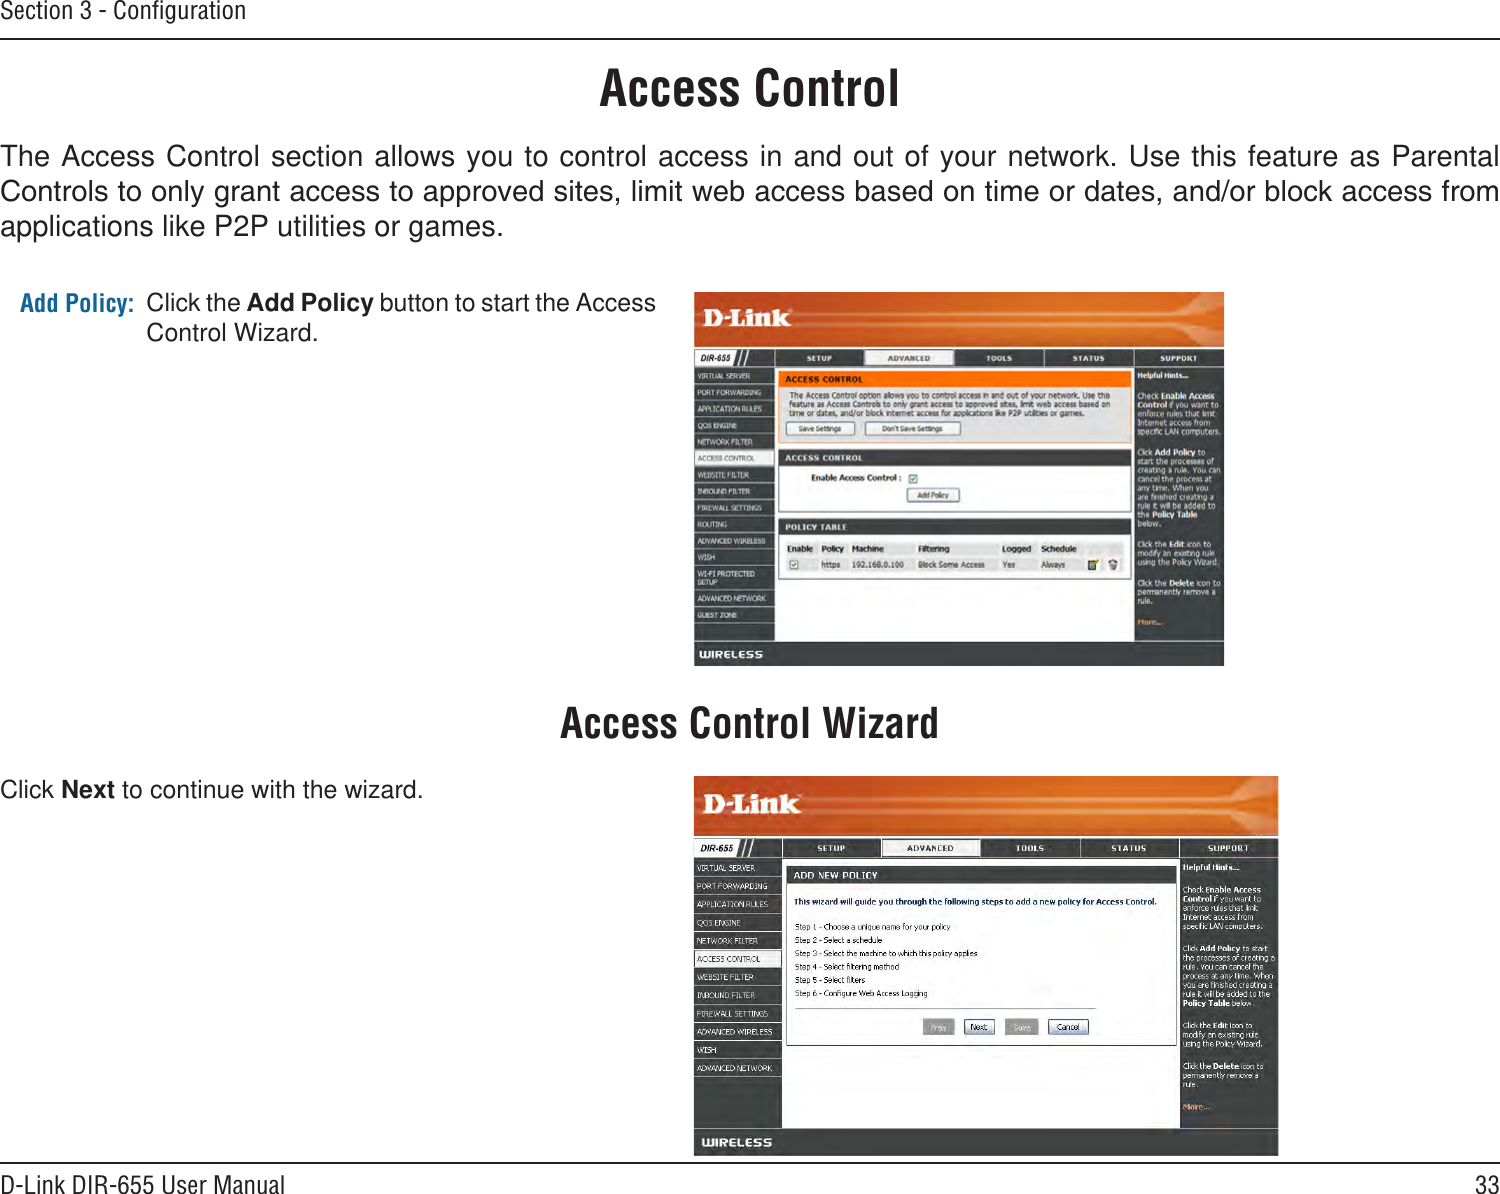 33D-Link DIR-655 User ManualSection 3 - ConﬁgurationAccess ControlClick the Add Policy button to start the Access Control Wizard. Add Policy:The Access Control section allows you to control access in and out of your network. Use this feature as Parental applications like P2P utilities or games.Click Next to continue with the wizard.Access Control Wizard